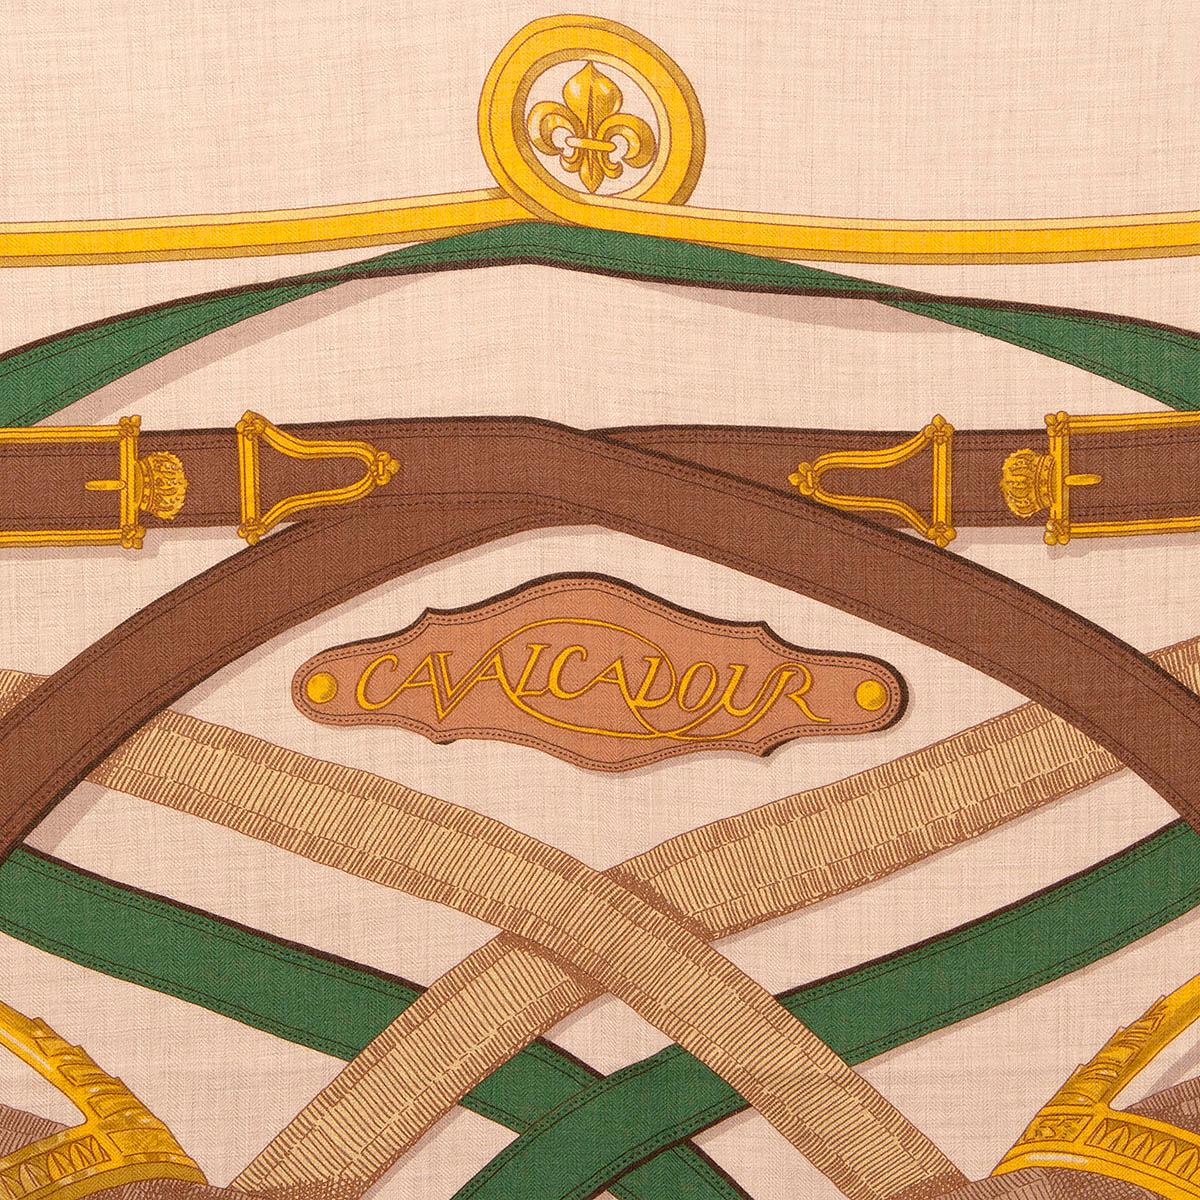 100% authentic Hermès 'Cavalcadour 140' shawl by Henri d'Origny in ivory cashmere (65%) and silk (35%) with details in yellow, brown, dark green and olive. Has been worn and is in excellent condition.

Story Behind:

Cavalcadour is a joyous